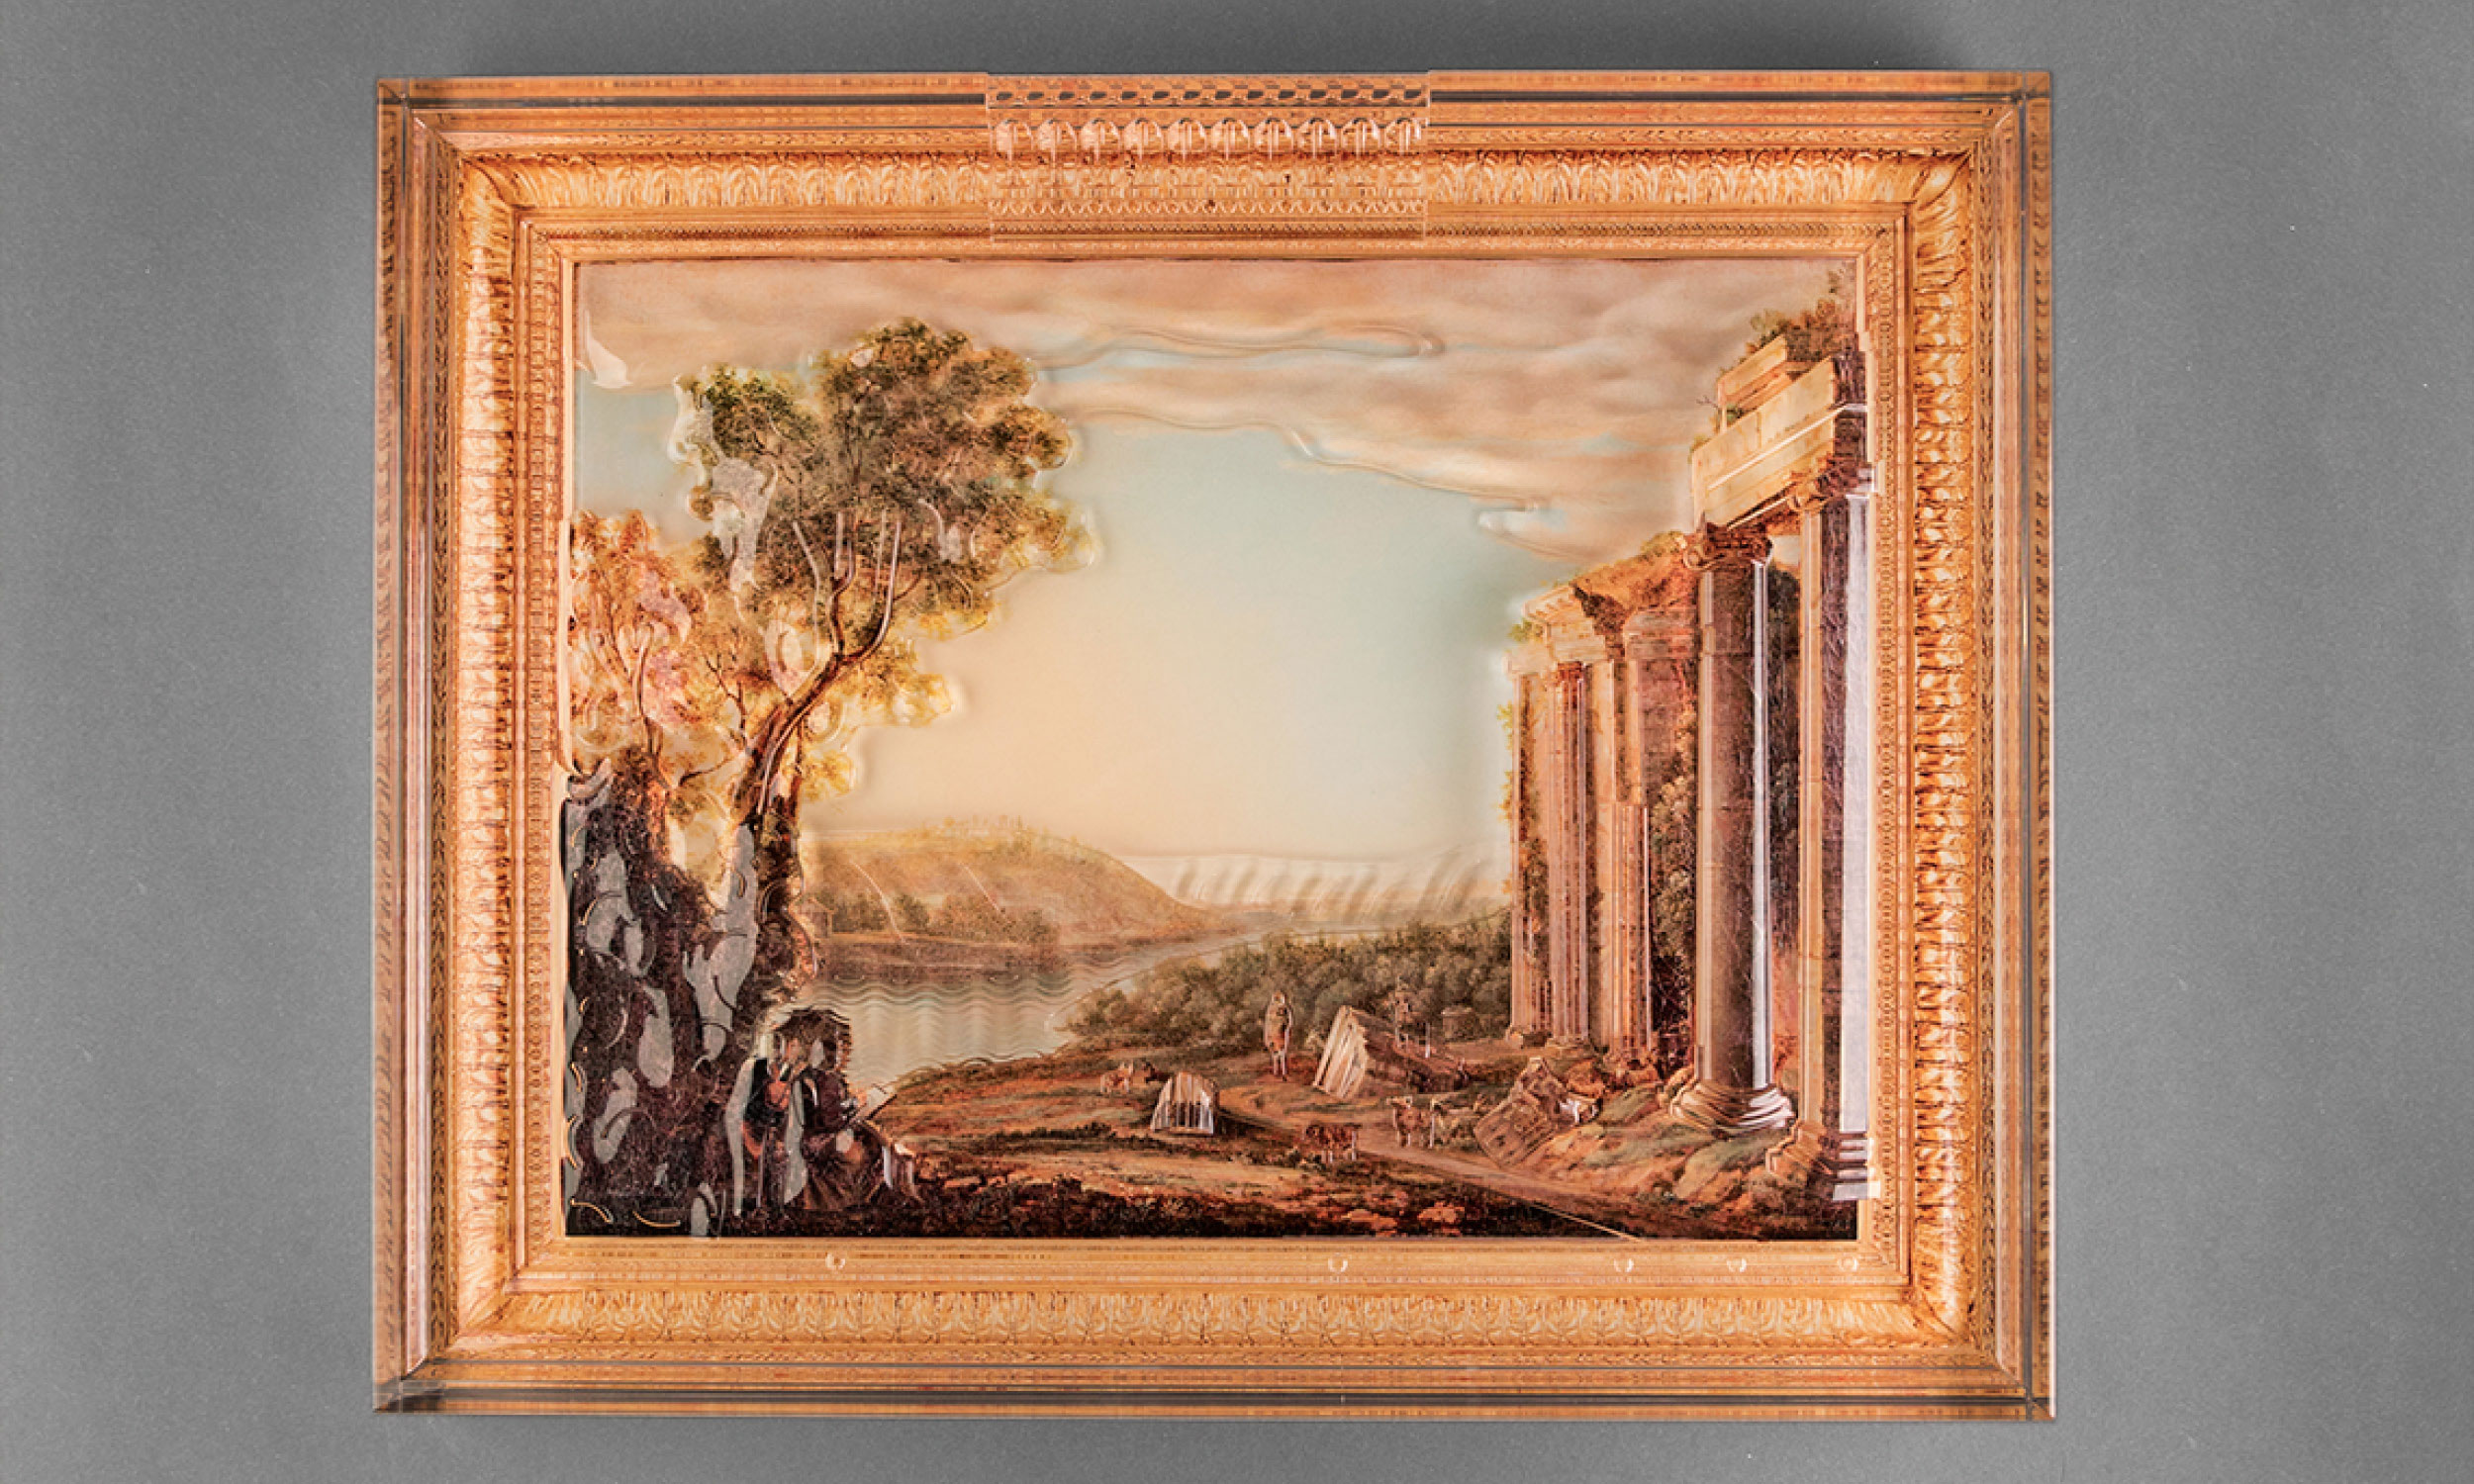 Photo of the tactile painting "Painter in front of a Roman ruin" with frame in front of grey background